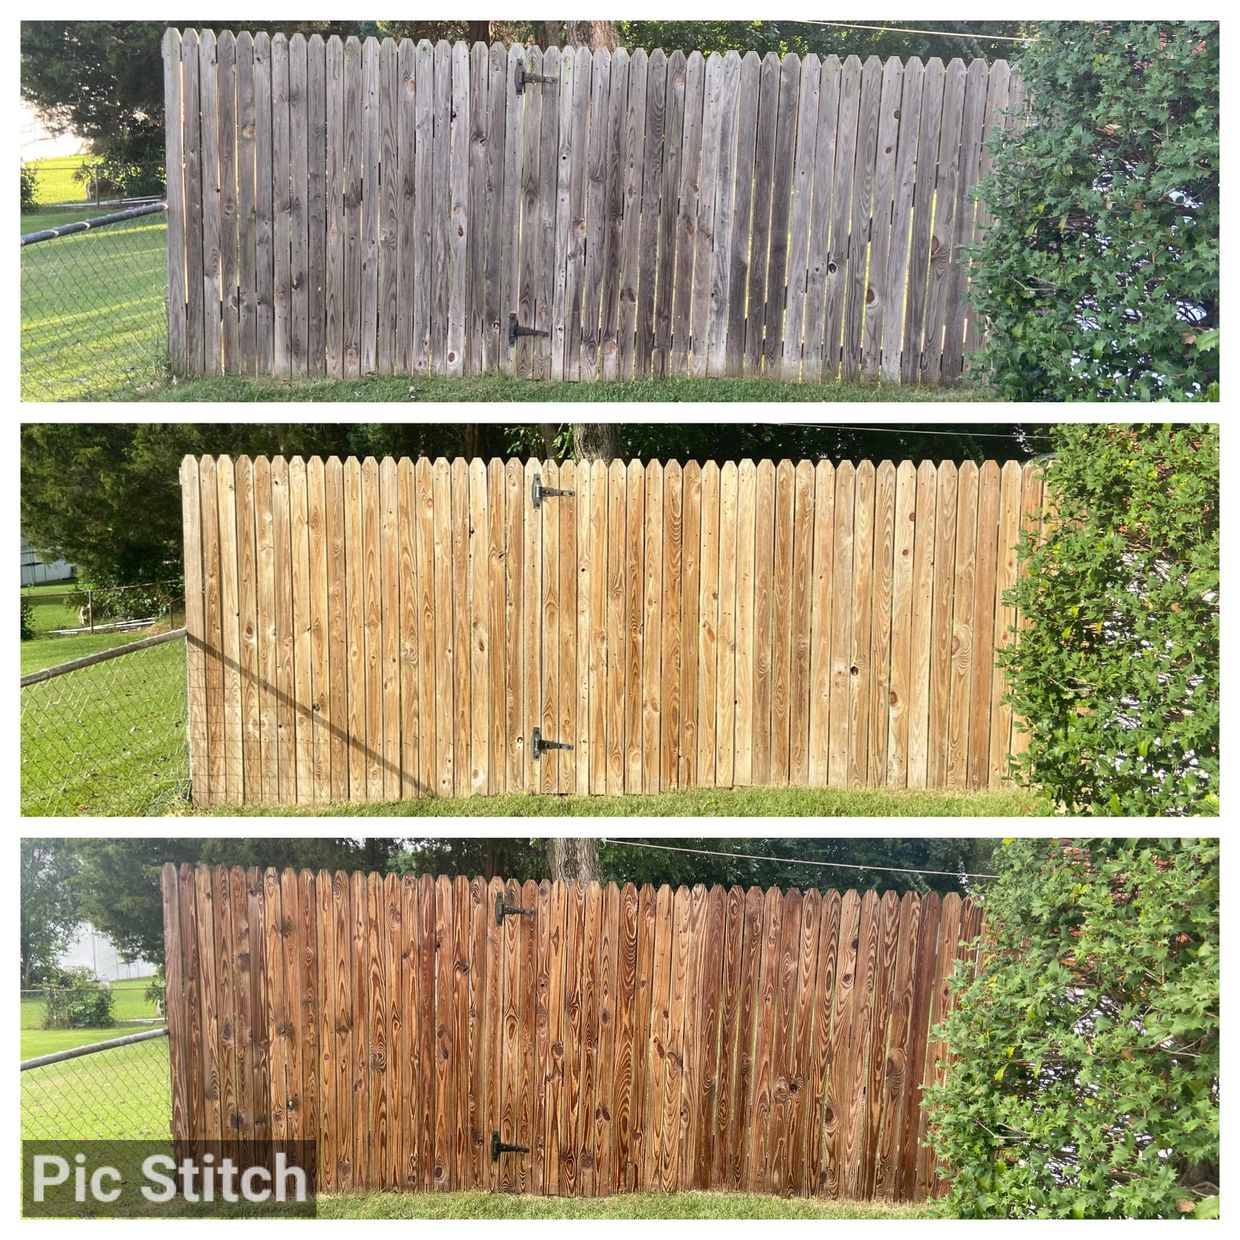 Wood fence cleaning and staining deck Trex Ipe wood oil based water acrylic restoration wood 